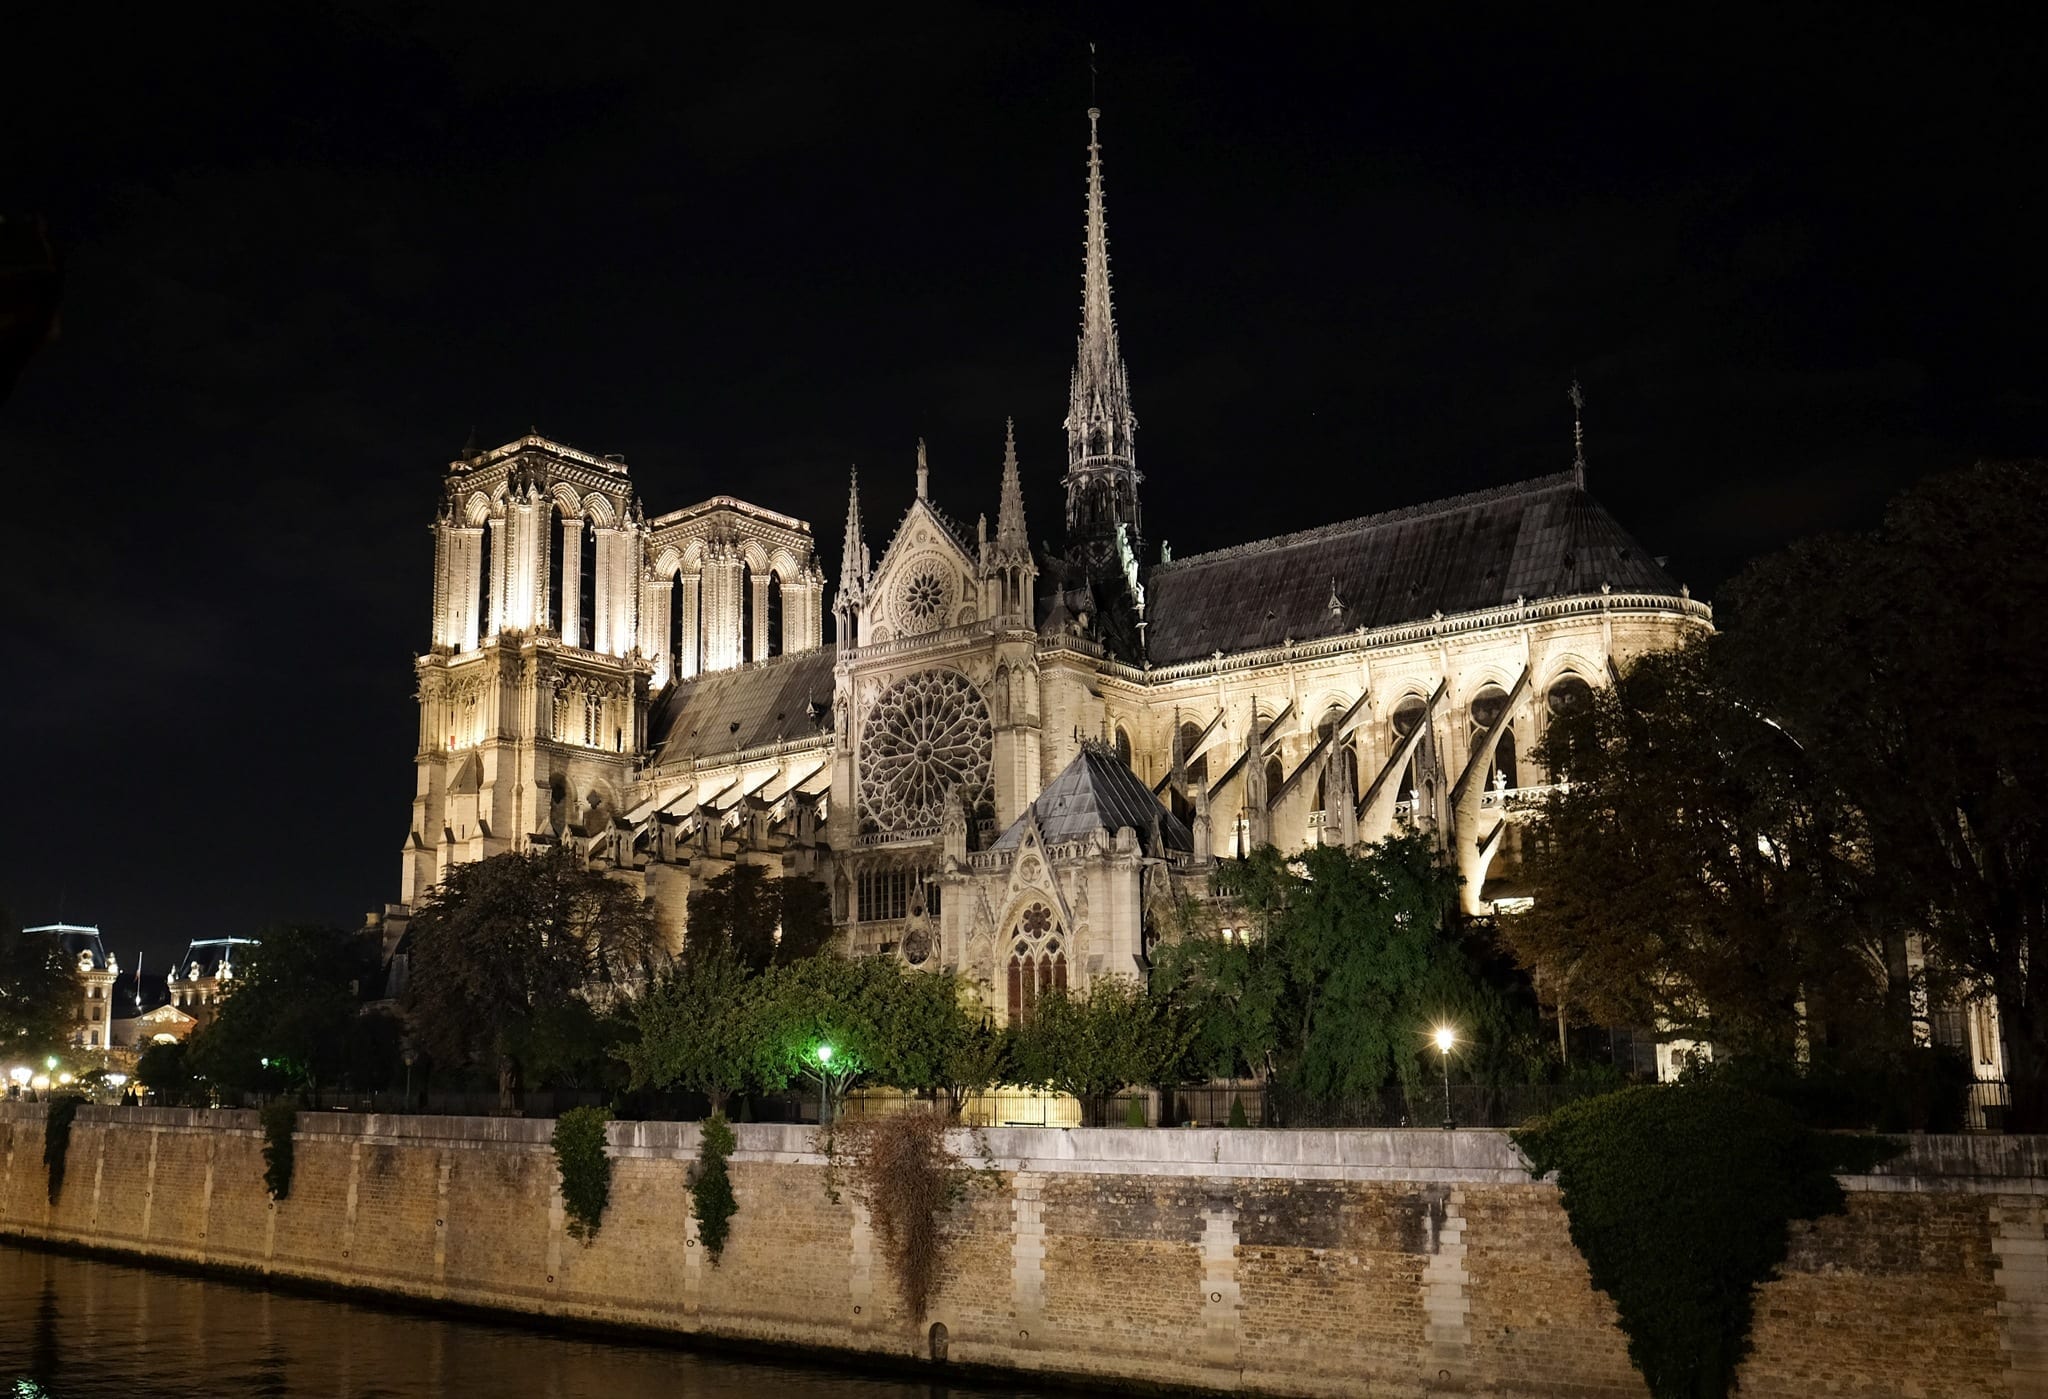 Notre-Dame cathedral lit up at night.